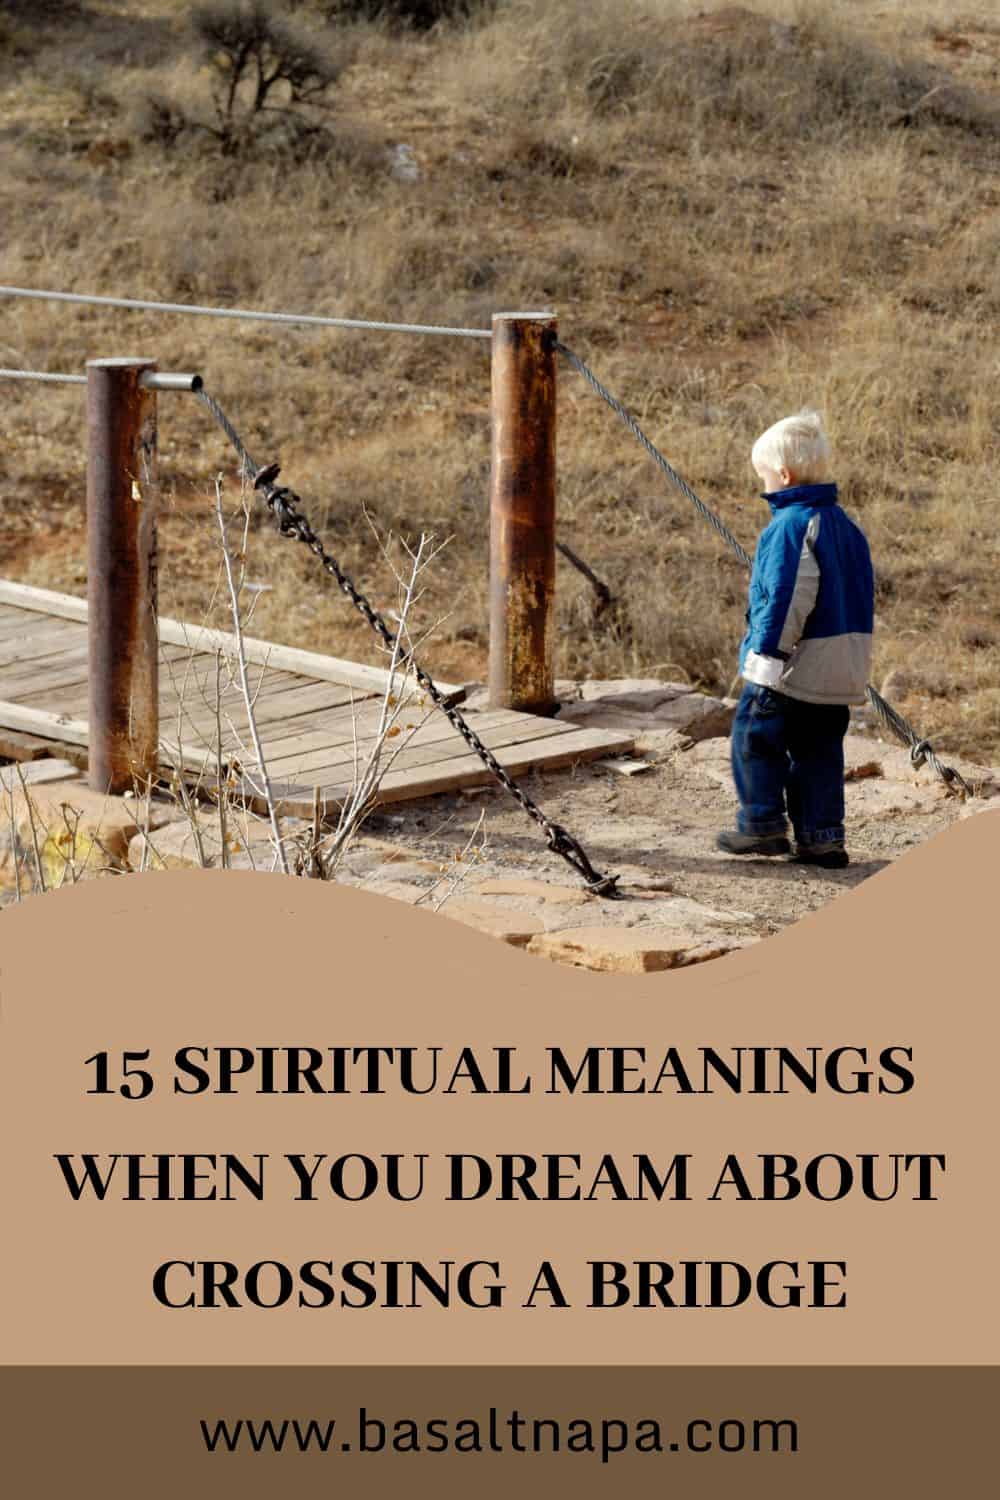 15 Spiritual Meanings When You Dream About Crossing a Bridge